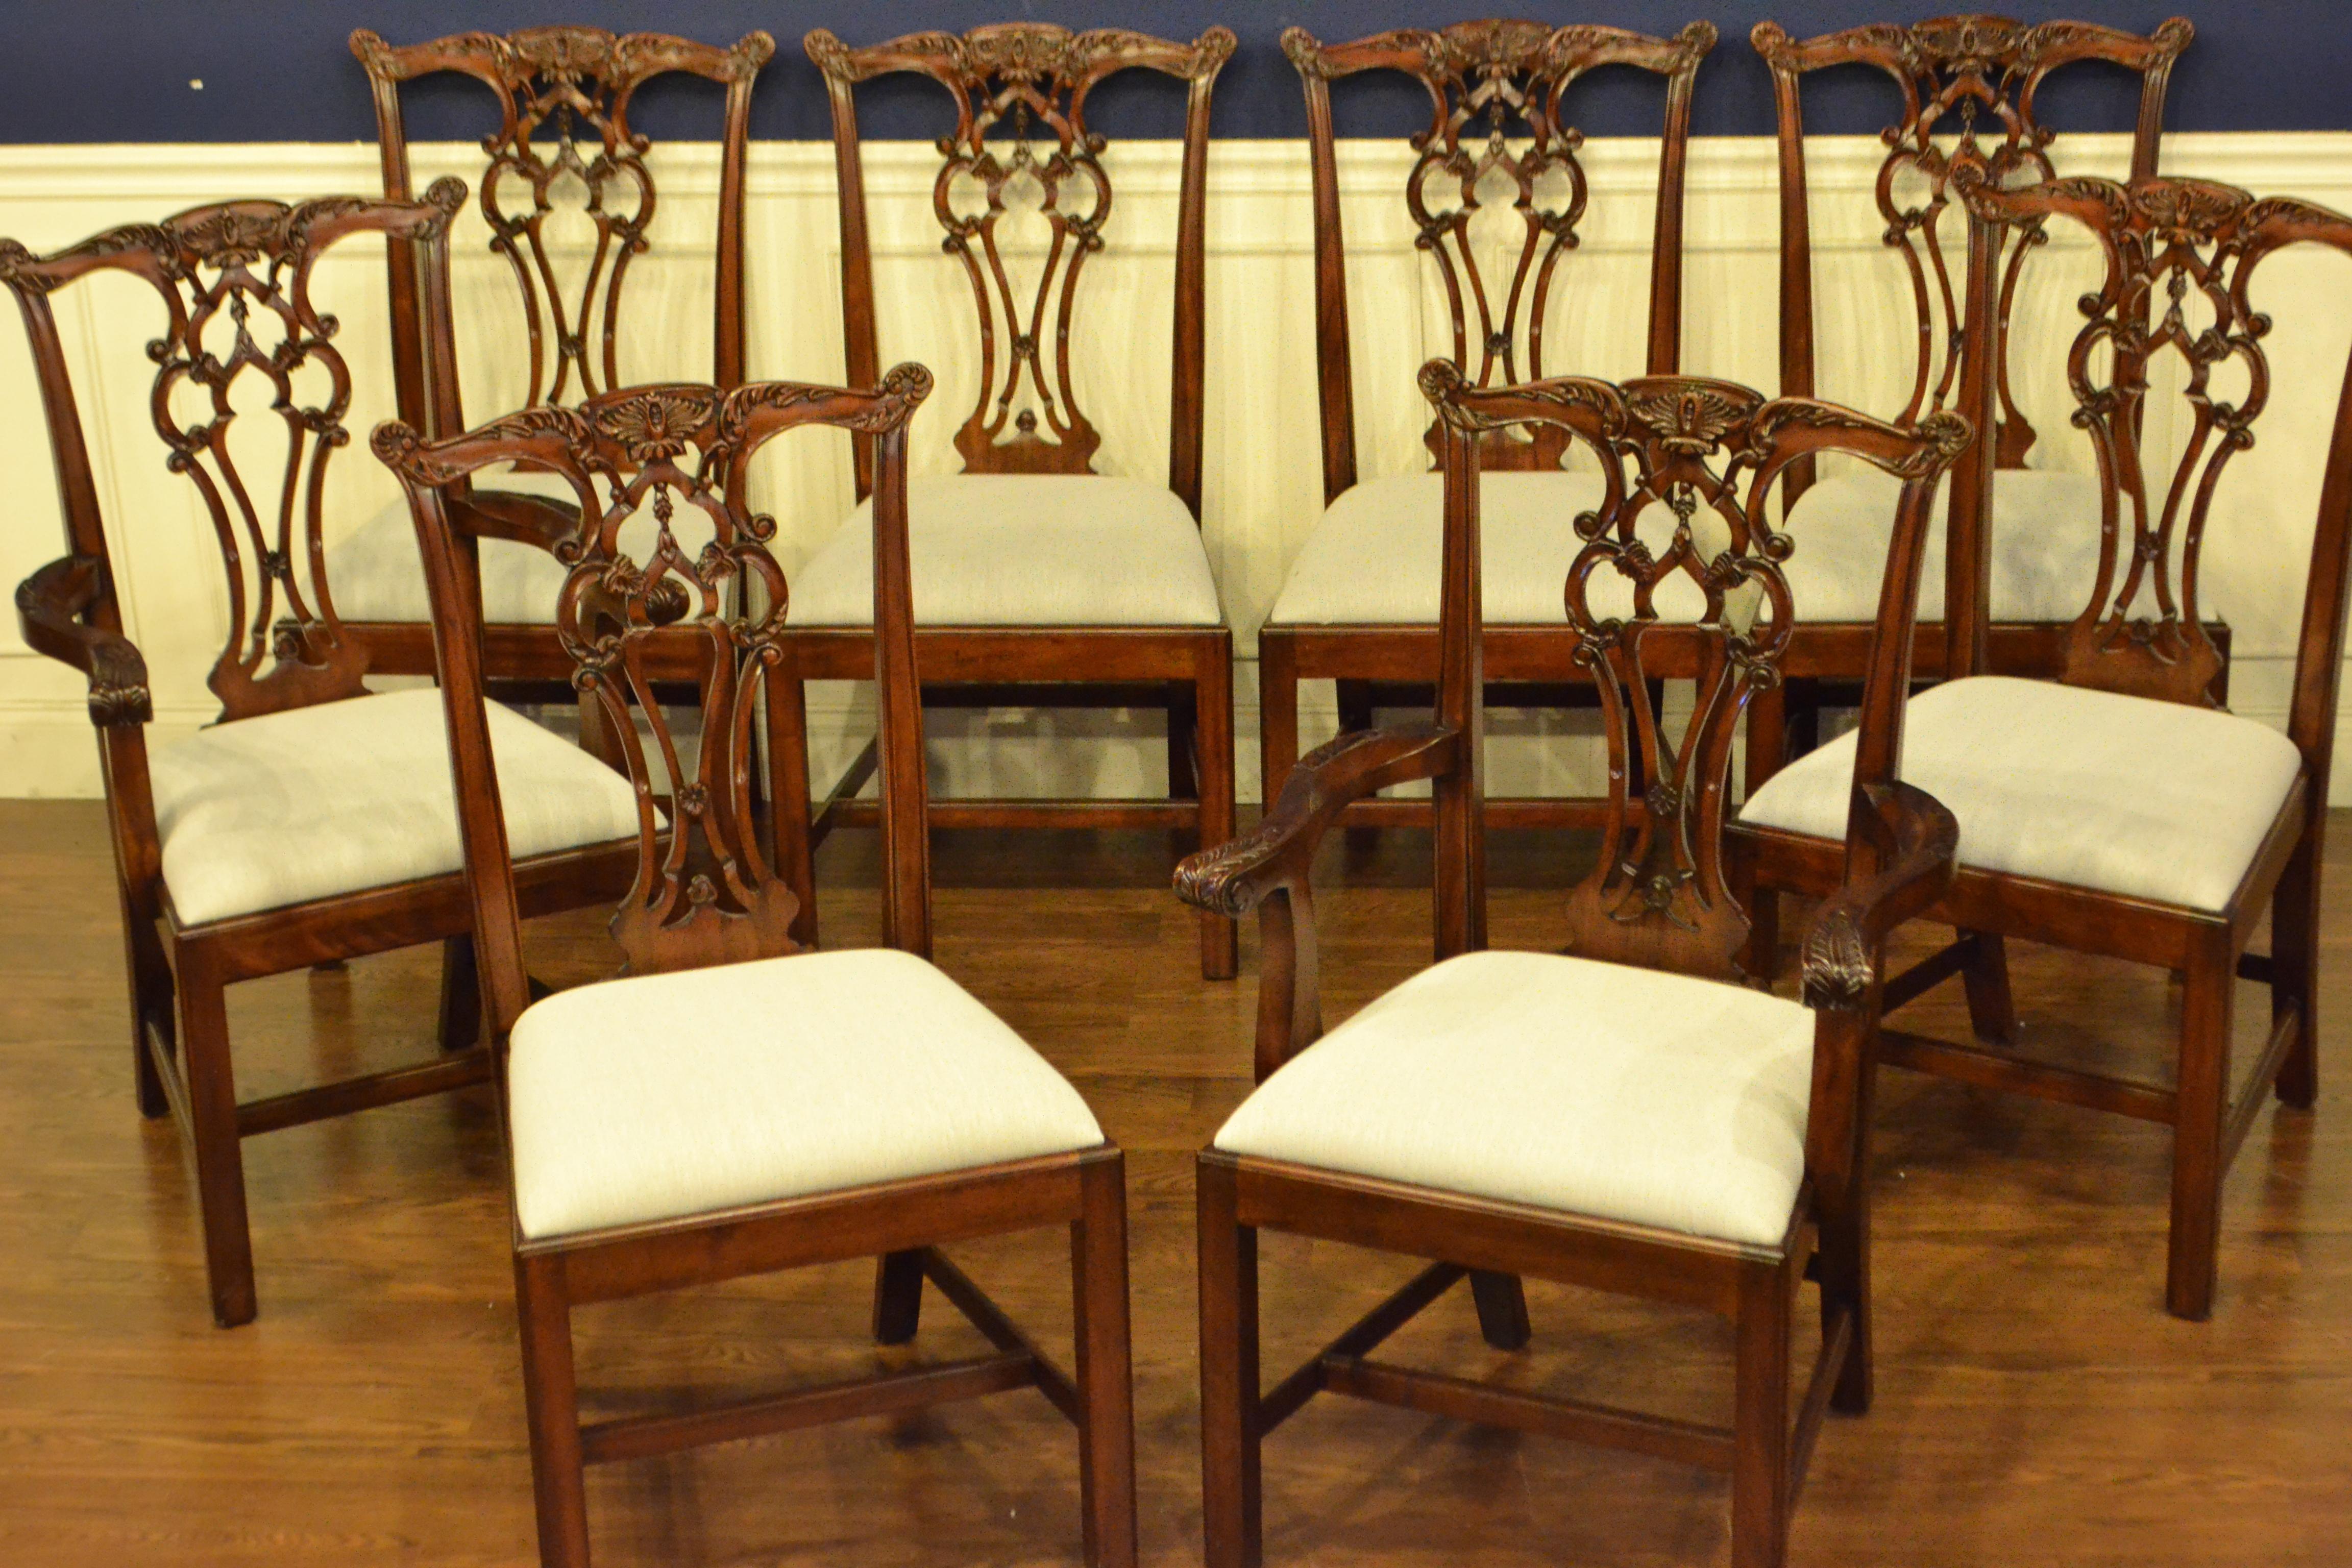 These are new traditional mahogany dining chairs. Their design was inspired by the Chippendale style straight leg dining chairs from the Georgian period. They feature Classic straight leg Chippendale legs and intricately carved backs. This is a set